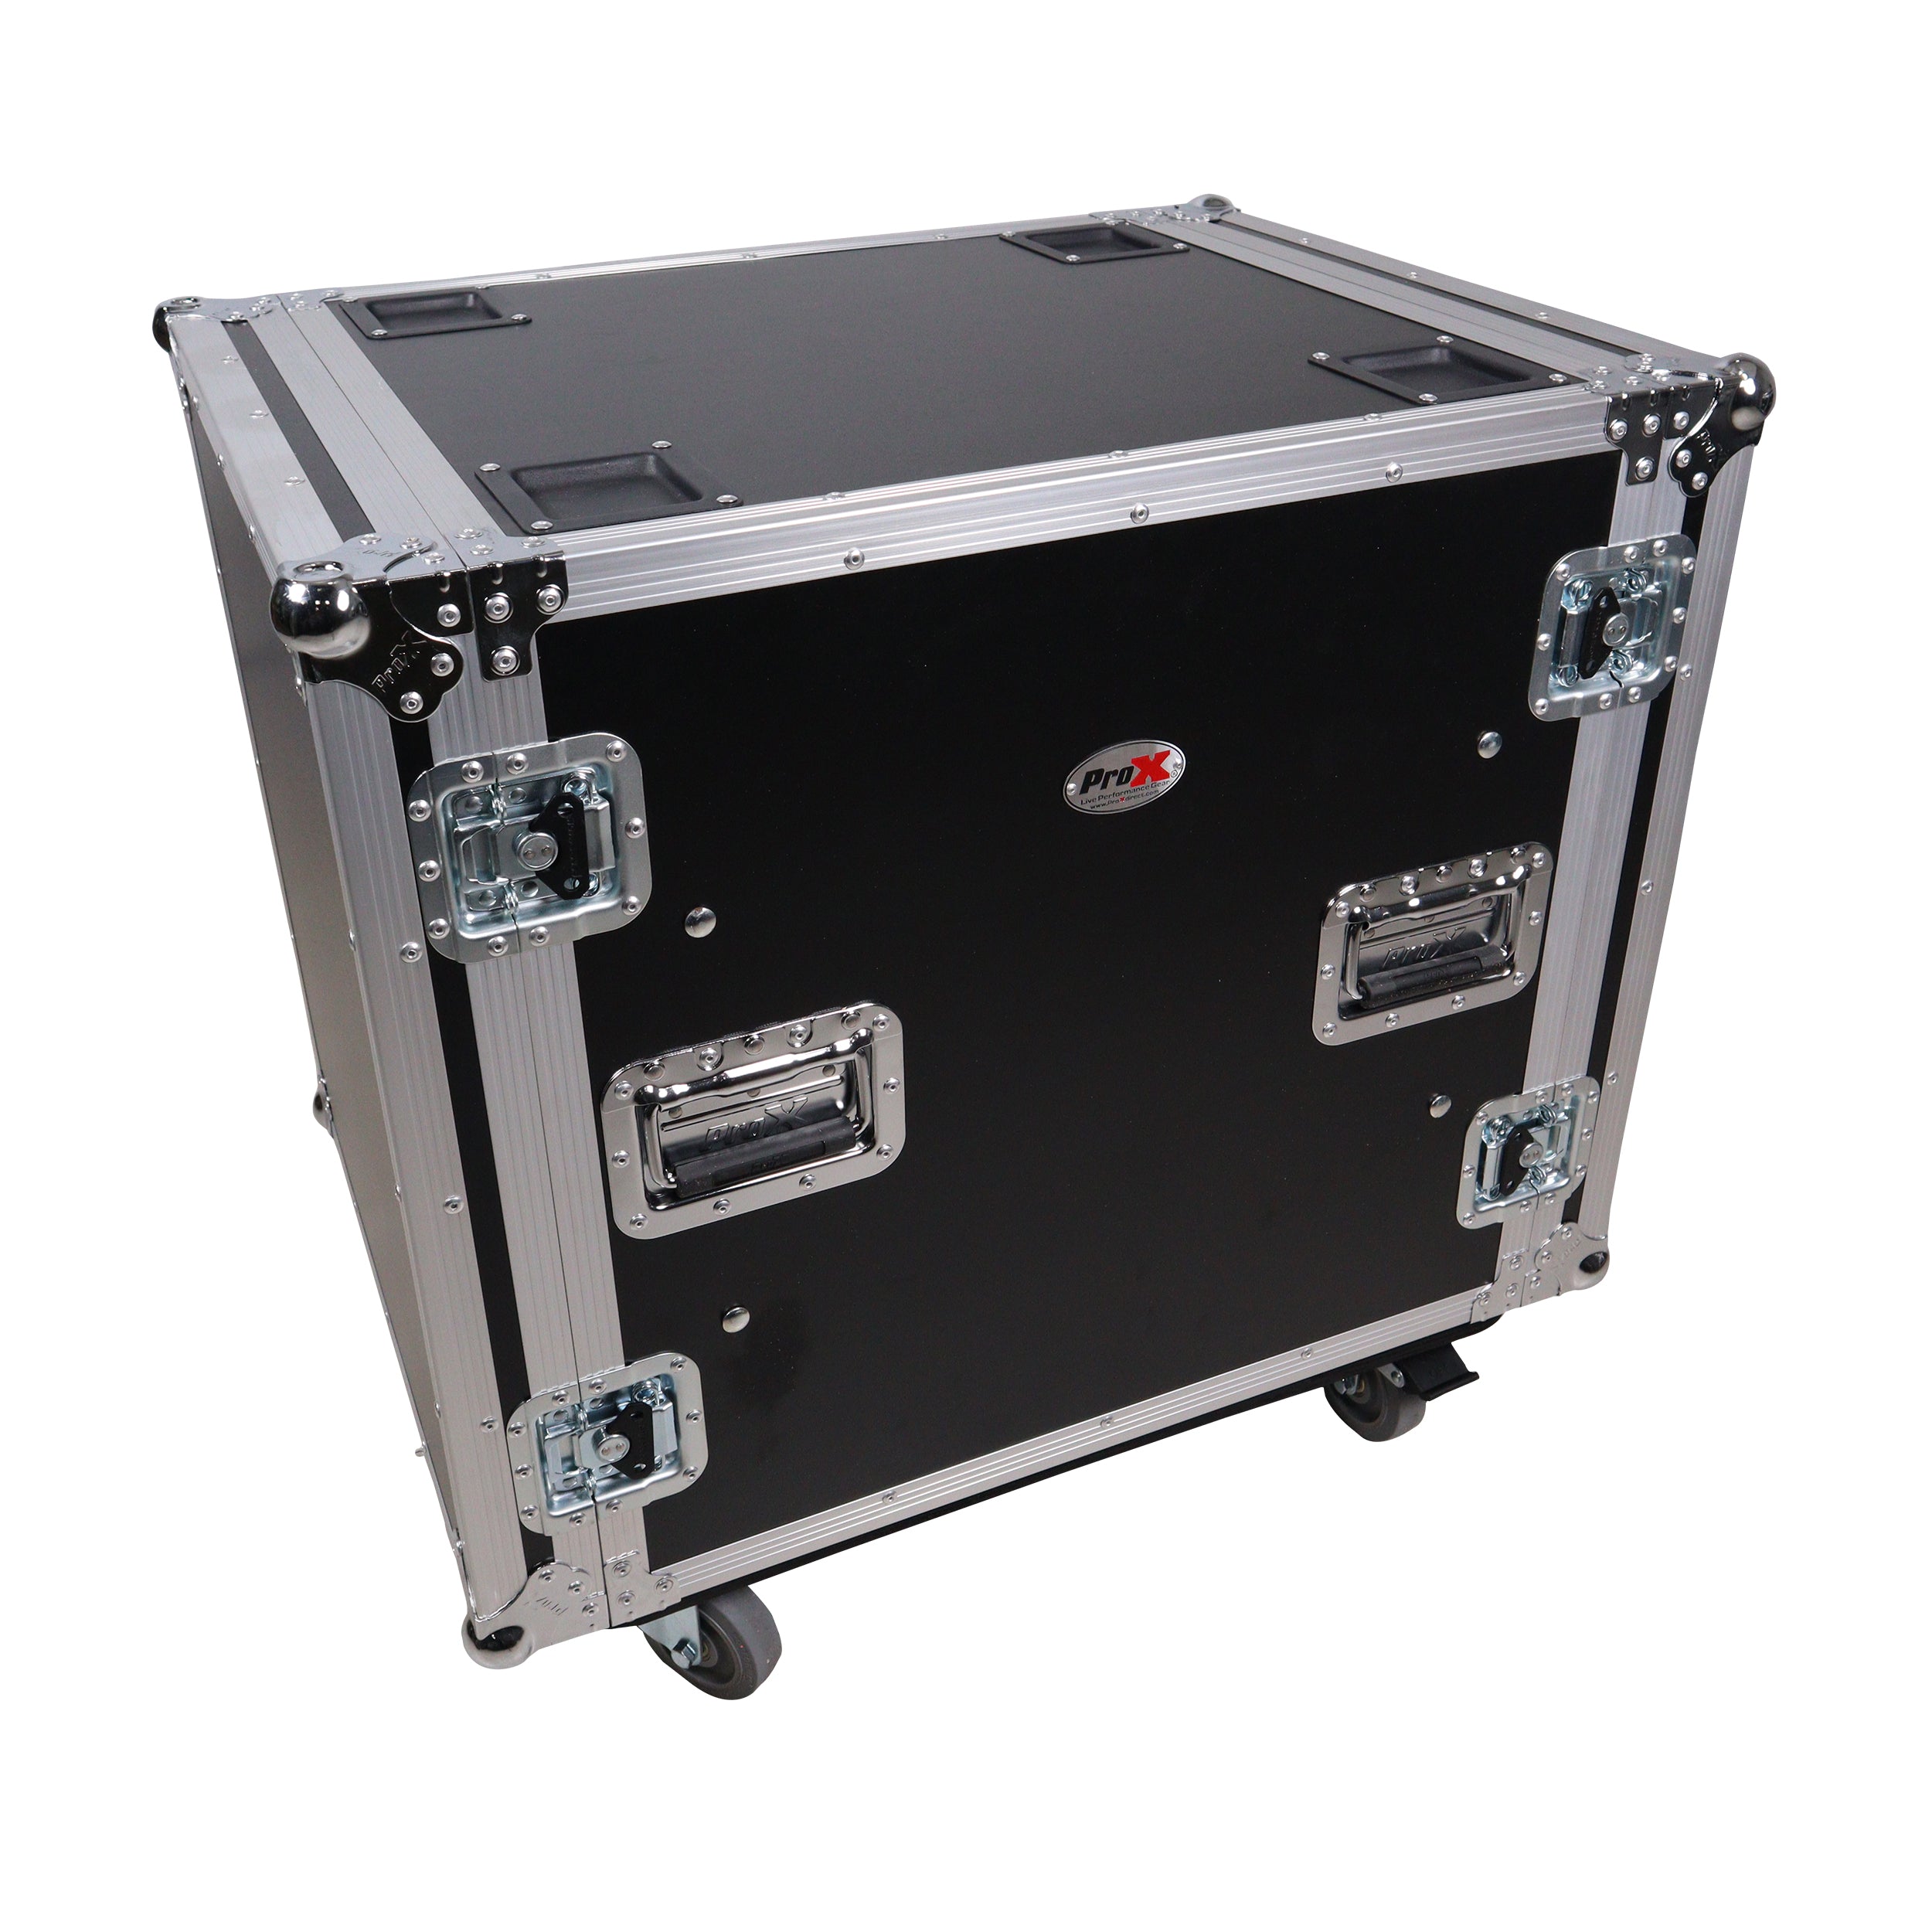 Pro X Space Shockproof Amp Rack ATA Flight Case 24 in. Depth with Caster Wheels T-12RSP24W